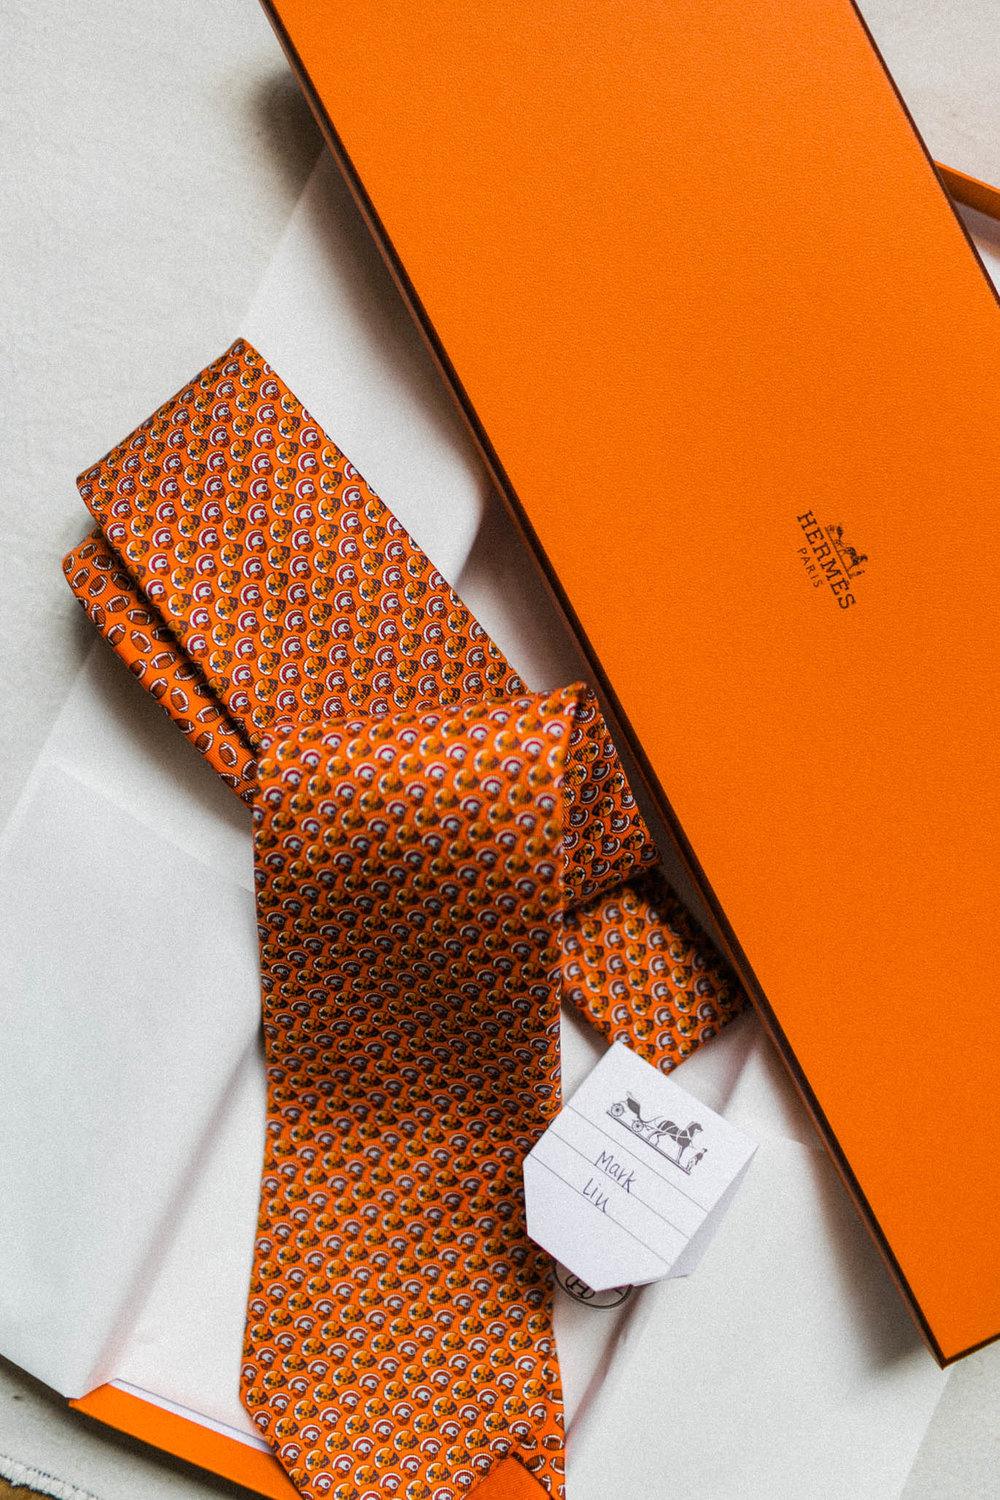 Jeff gifted his groomsmen with these personalized  Hermes  ties.